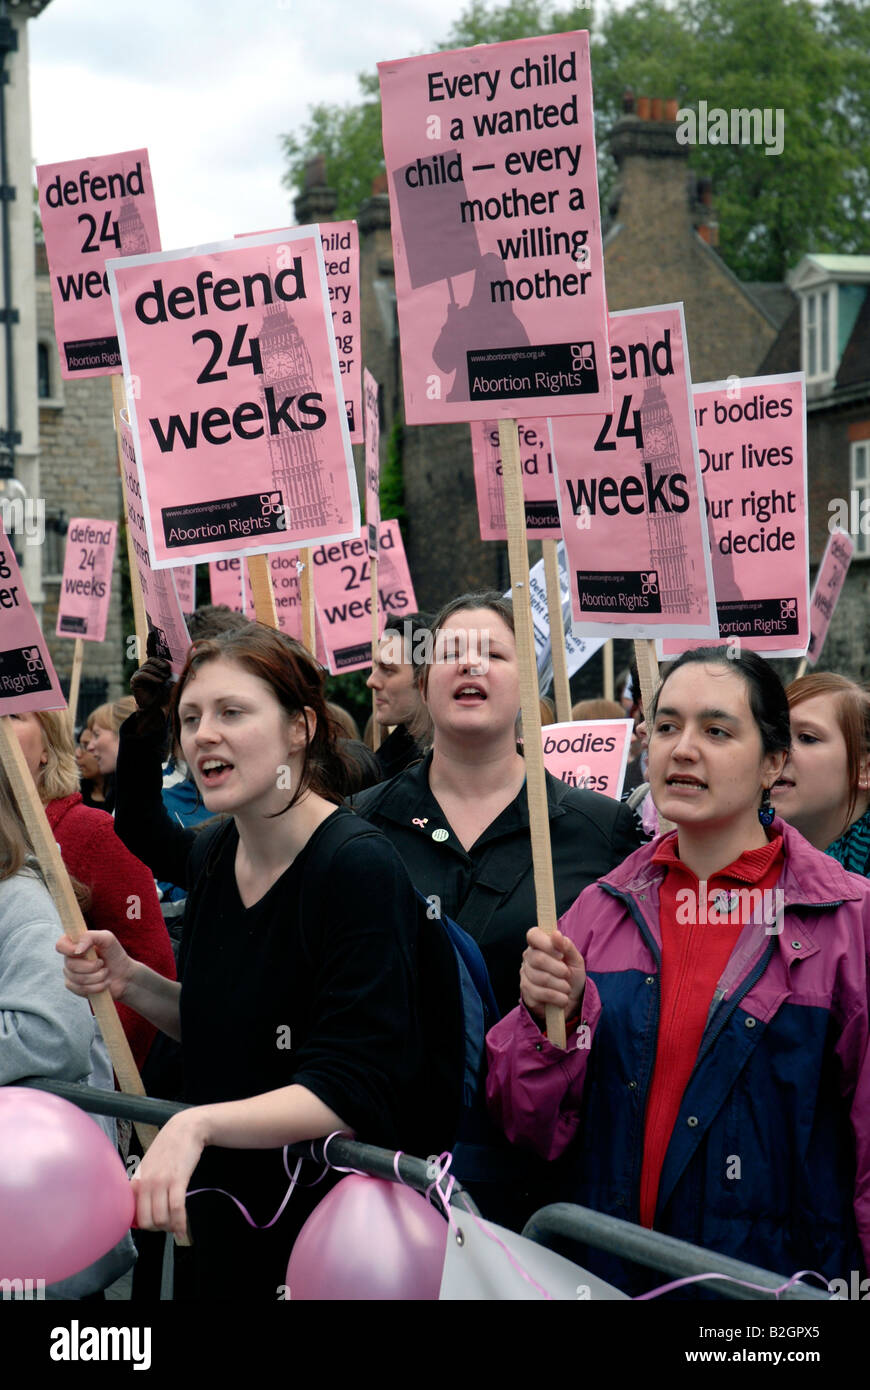 Pro-choice protest group opposing bill lowering limit for abortions being brought down by four weeks to 20 weeks. Stock Photo